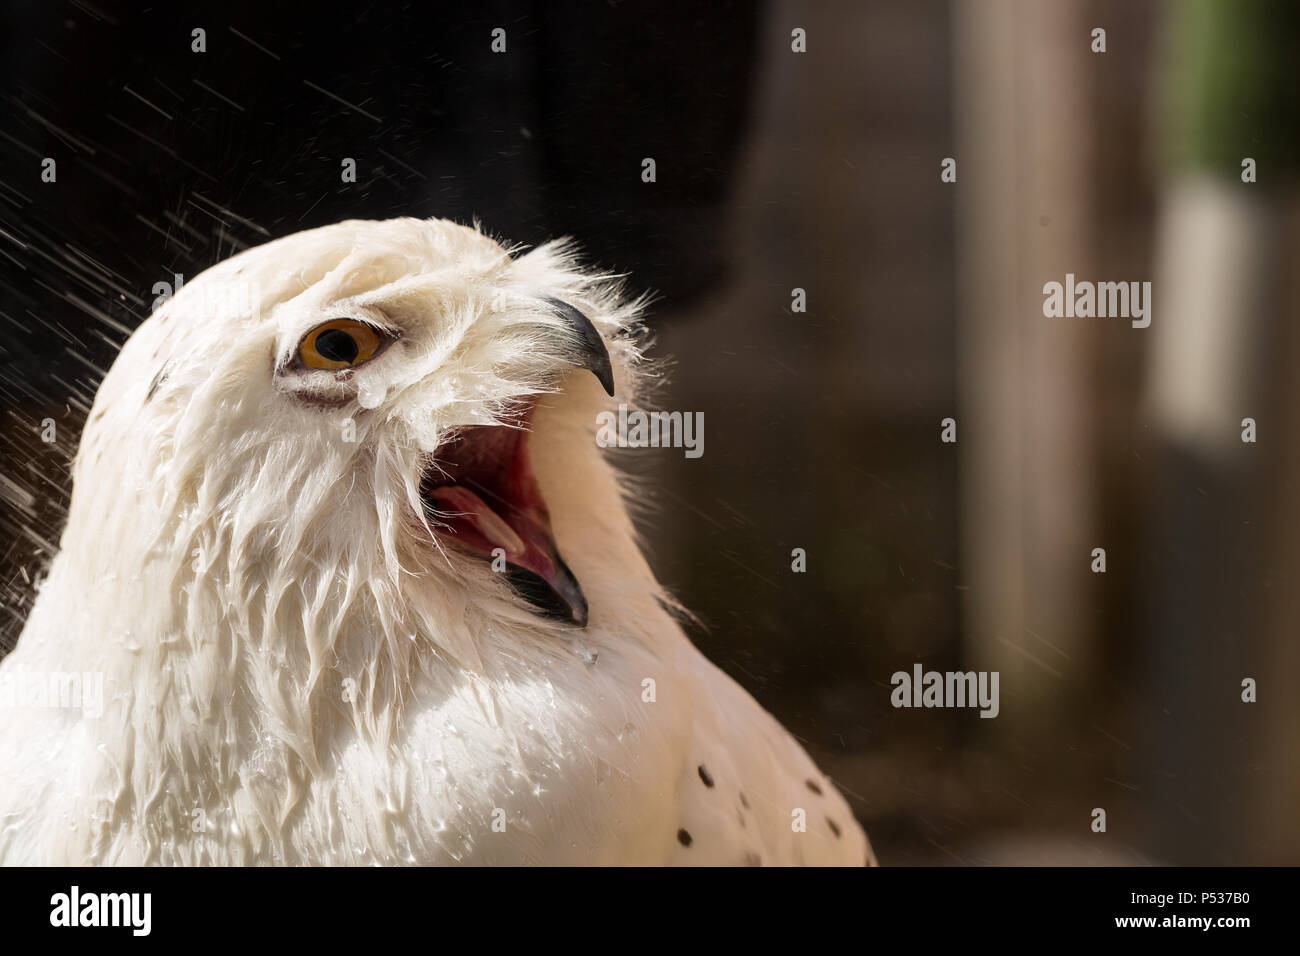 wet snowy owl drenched from shower Stock Photo